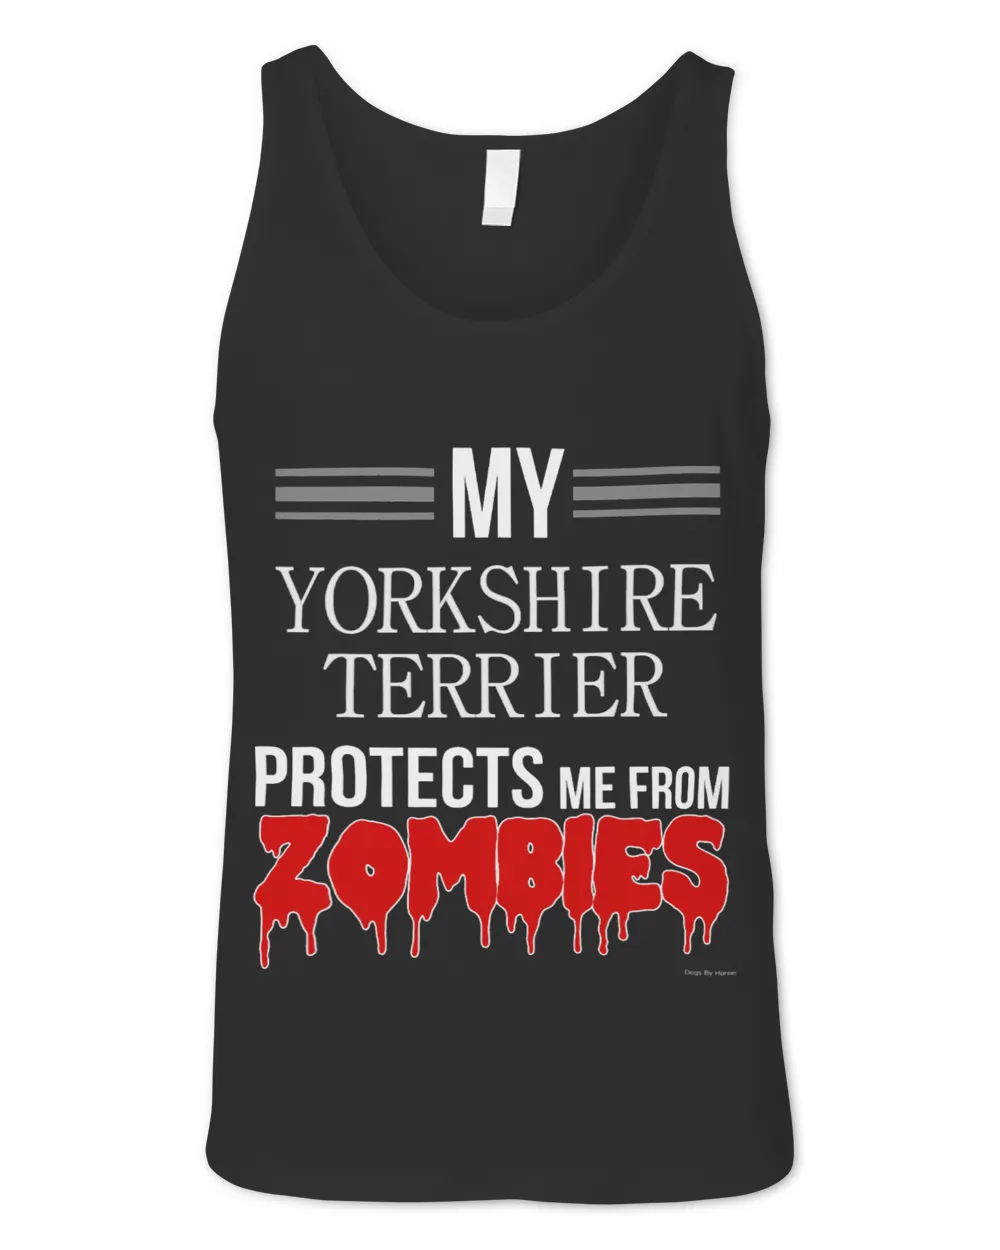 Yorkshire Terrier Funny Zombie Yorkshire Terrier Dog Shirt Yorkie